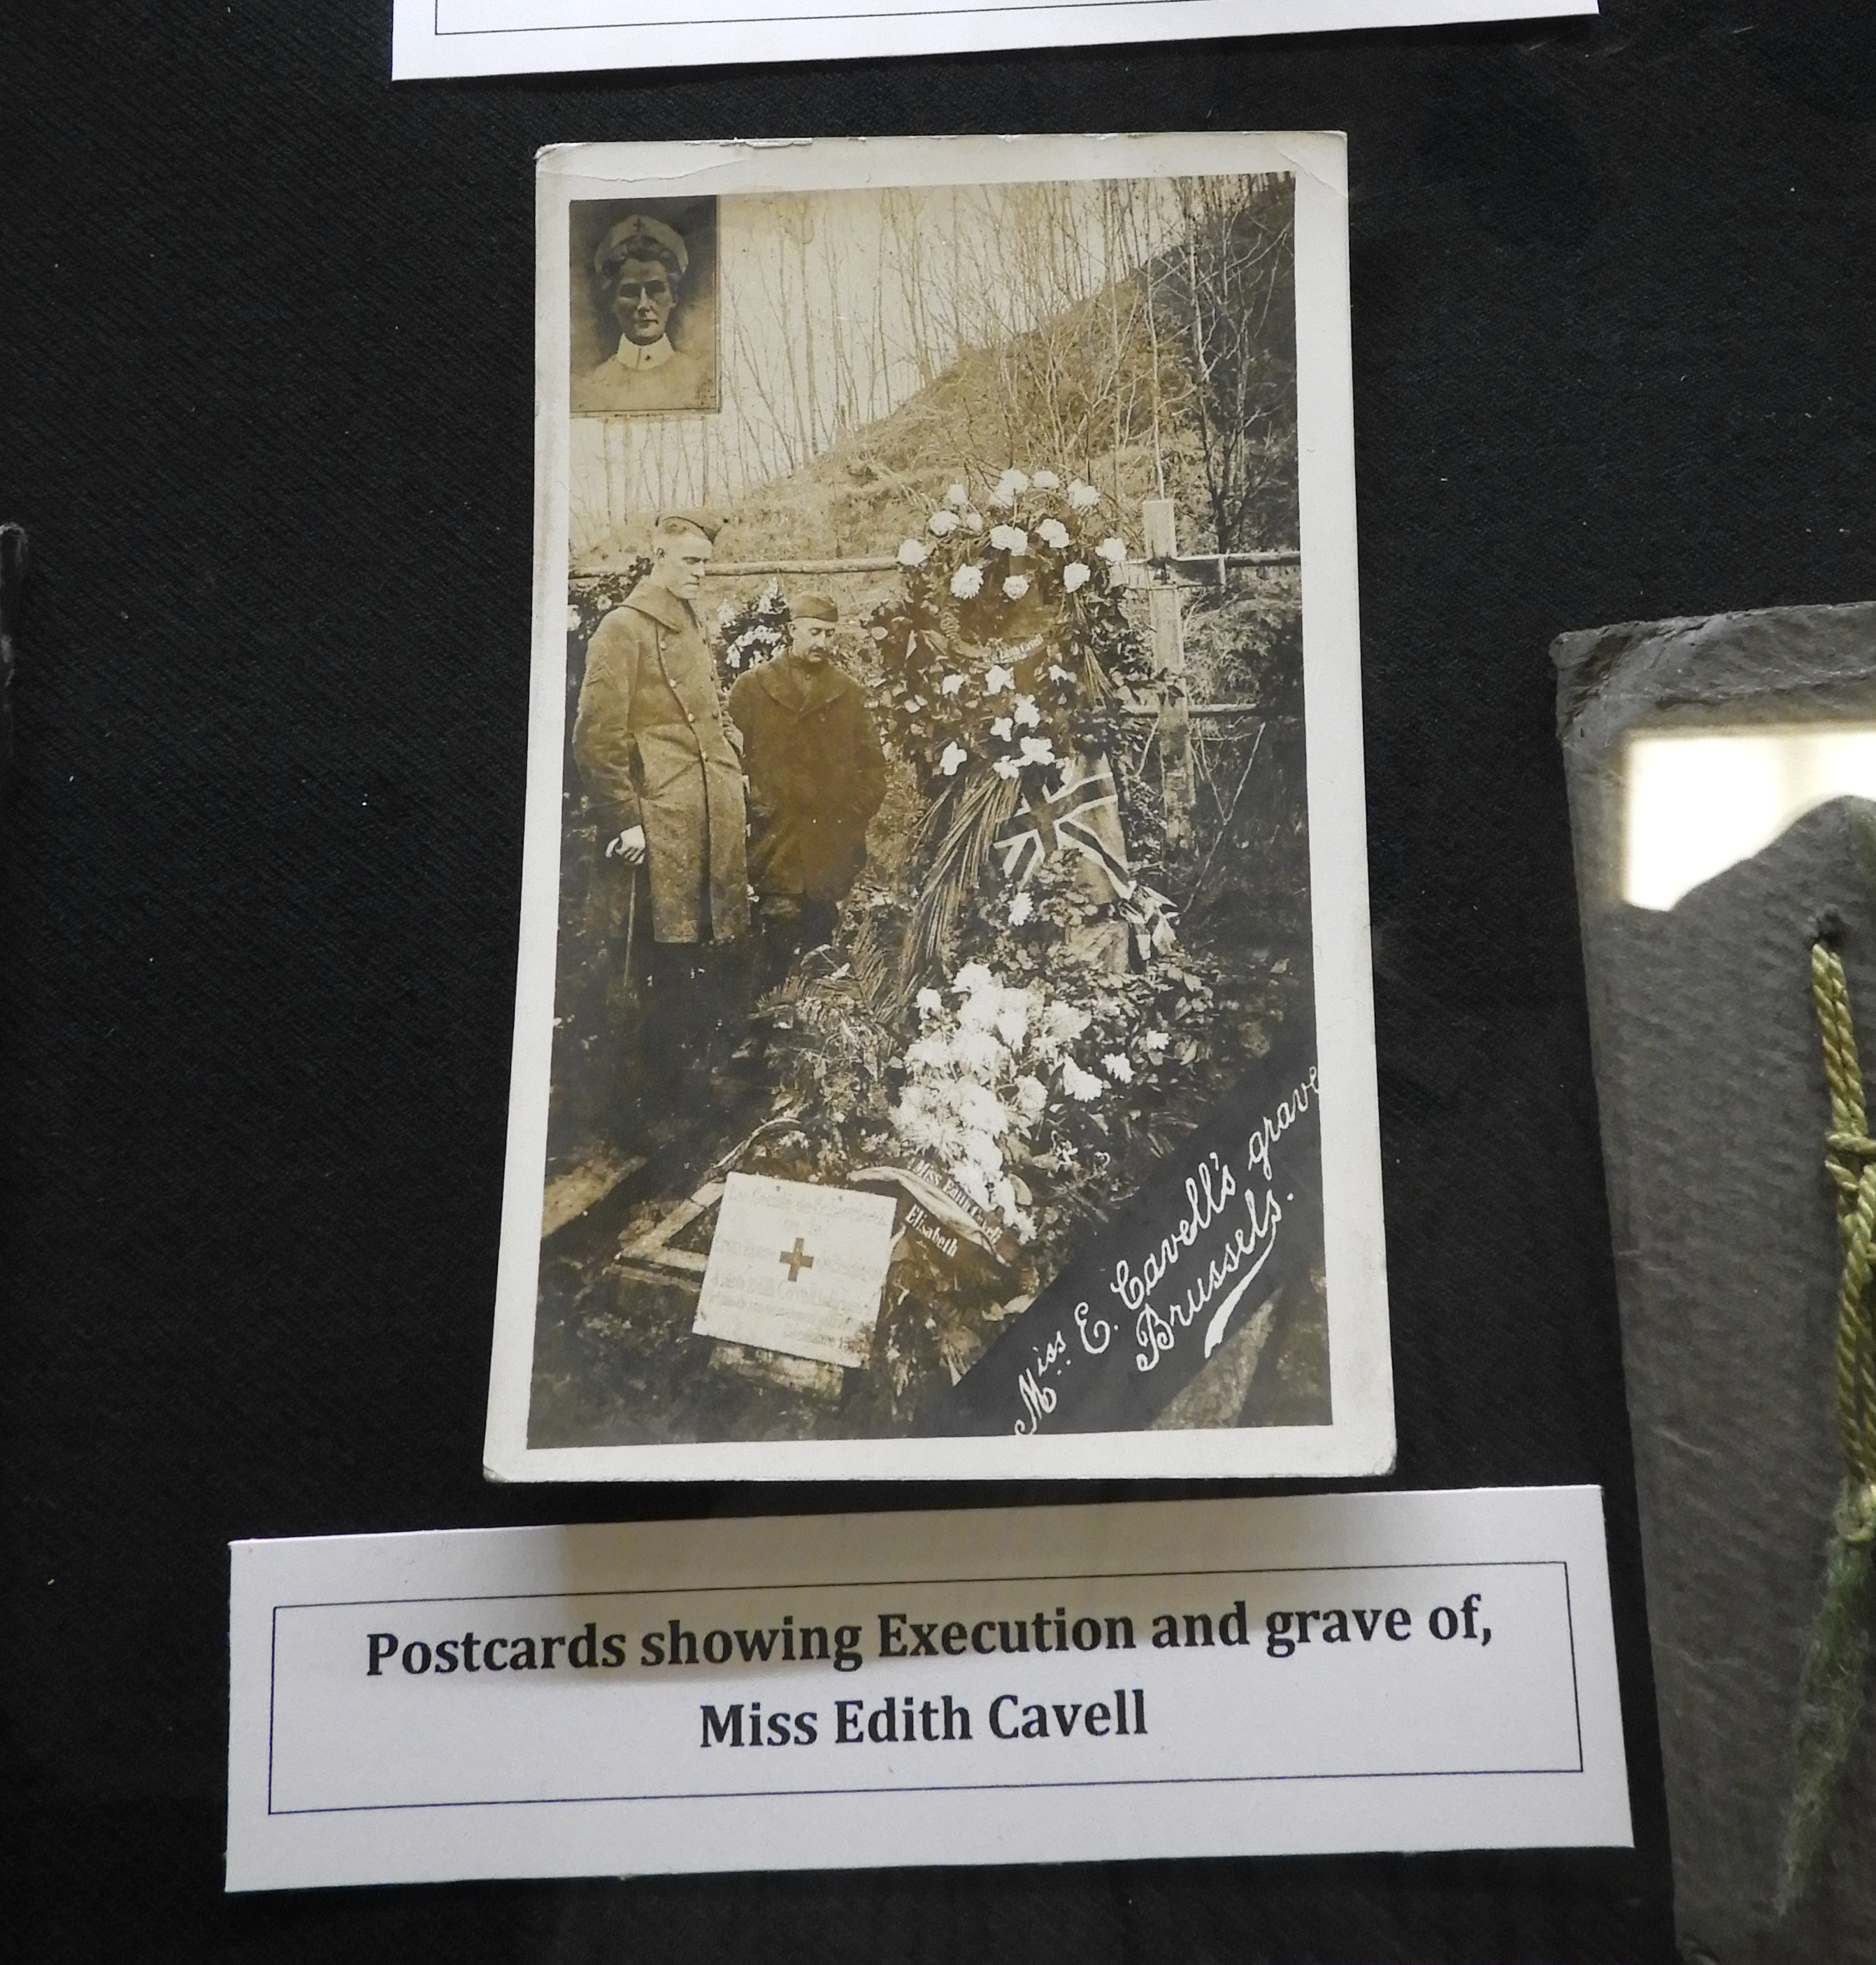 Postcard of Miss Edith Cavell grave